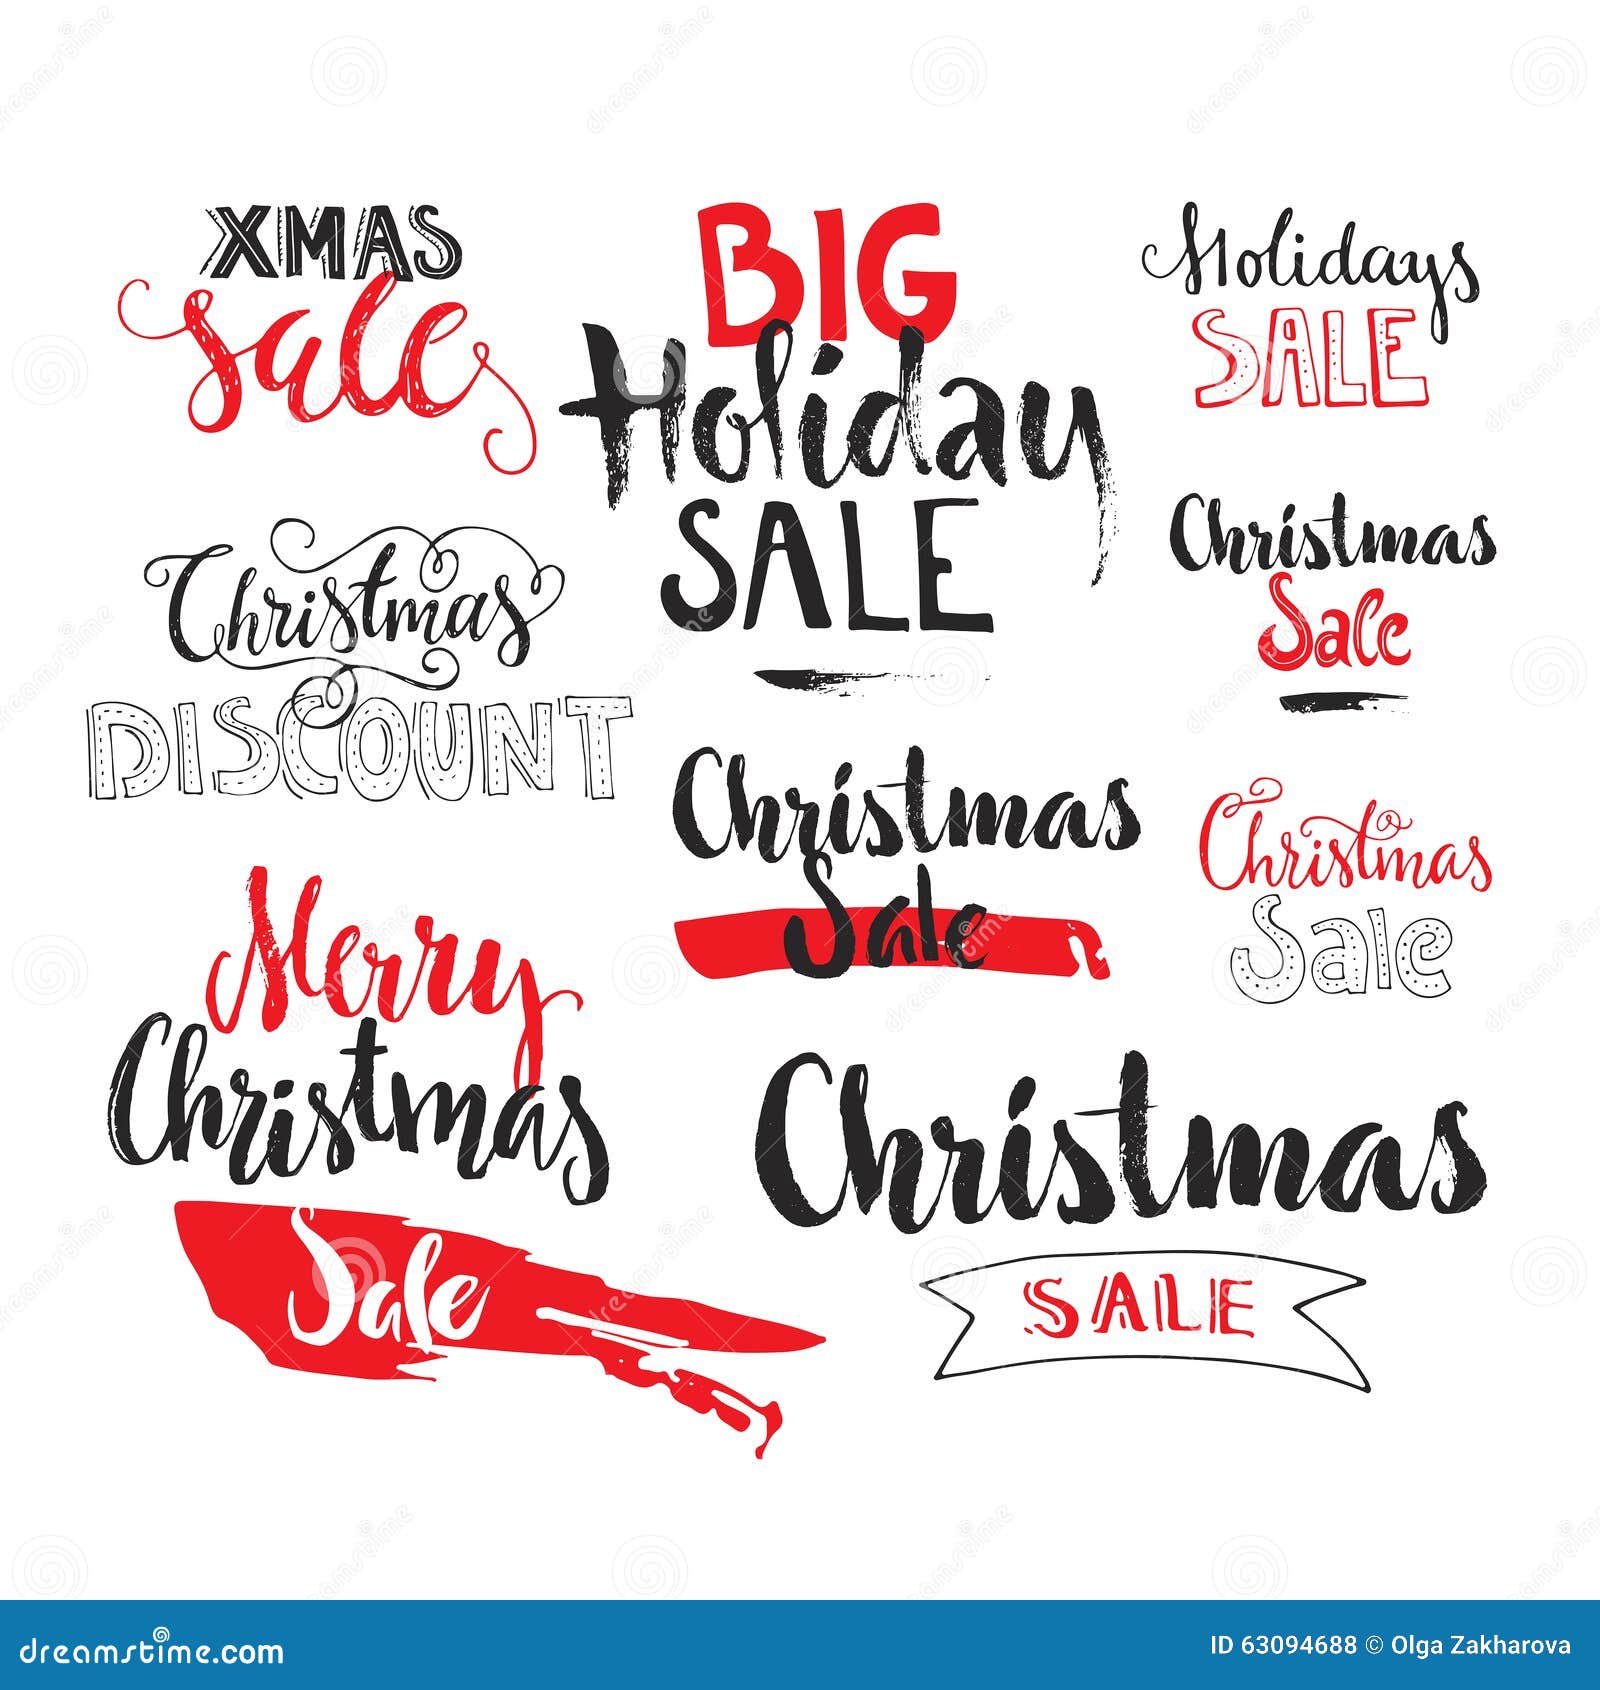 Christmas sale. Collection of holiday sale and chrisrmas dicsount signs. Handdrawn lettering. Vector graphic.